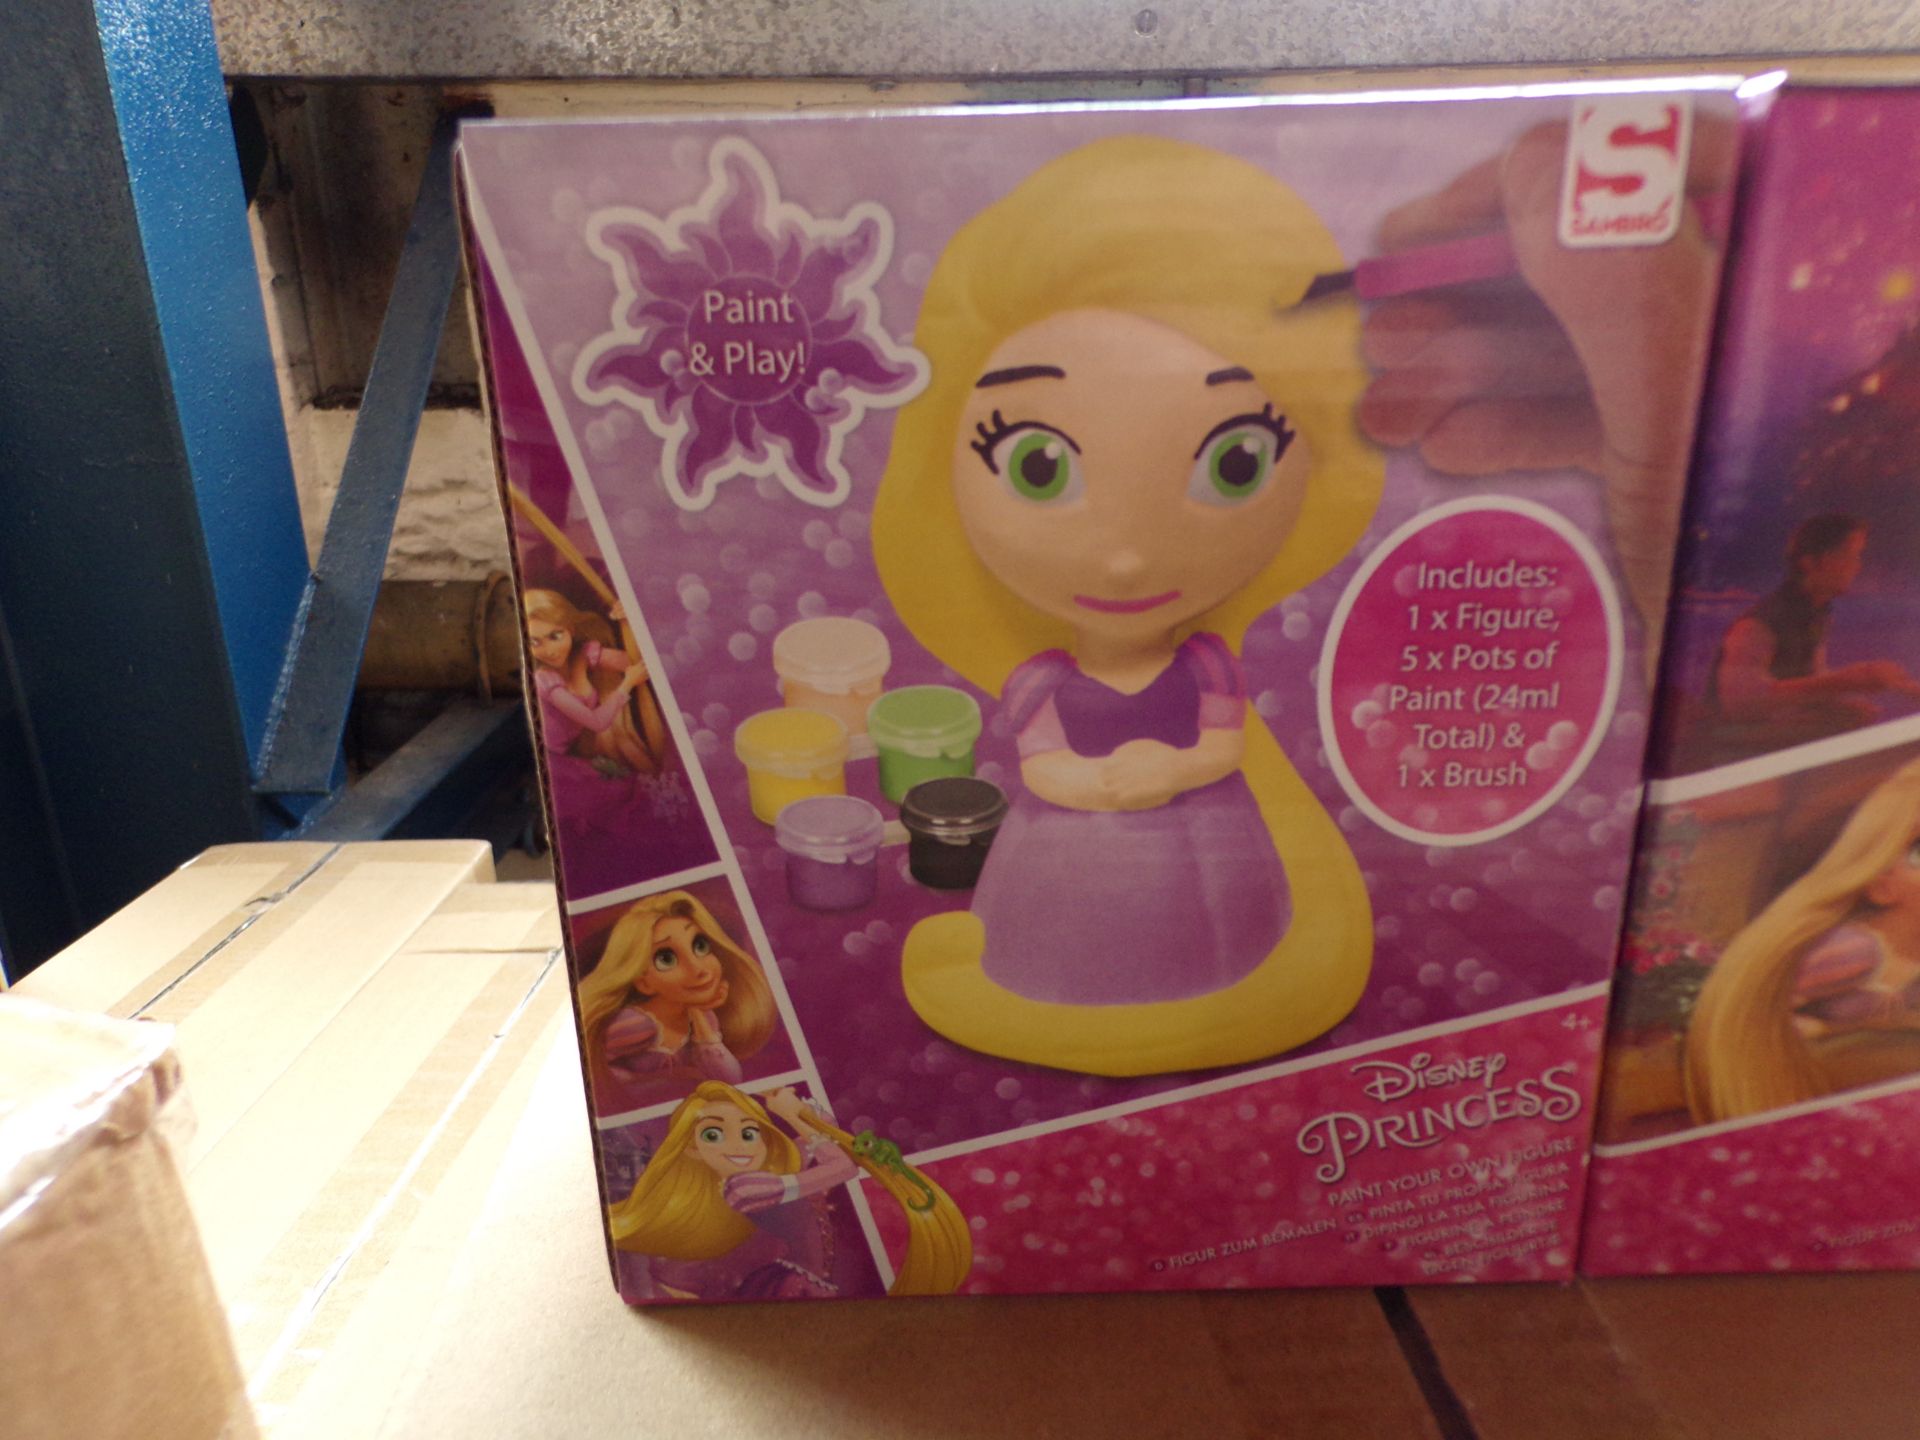 72 x New & Boxed Disney Princess Paint Your Own Figures - Image 2 of 3